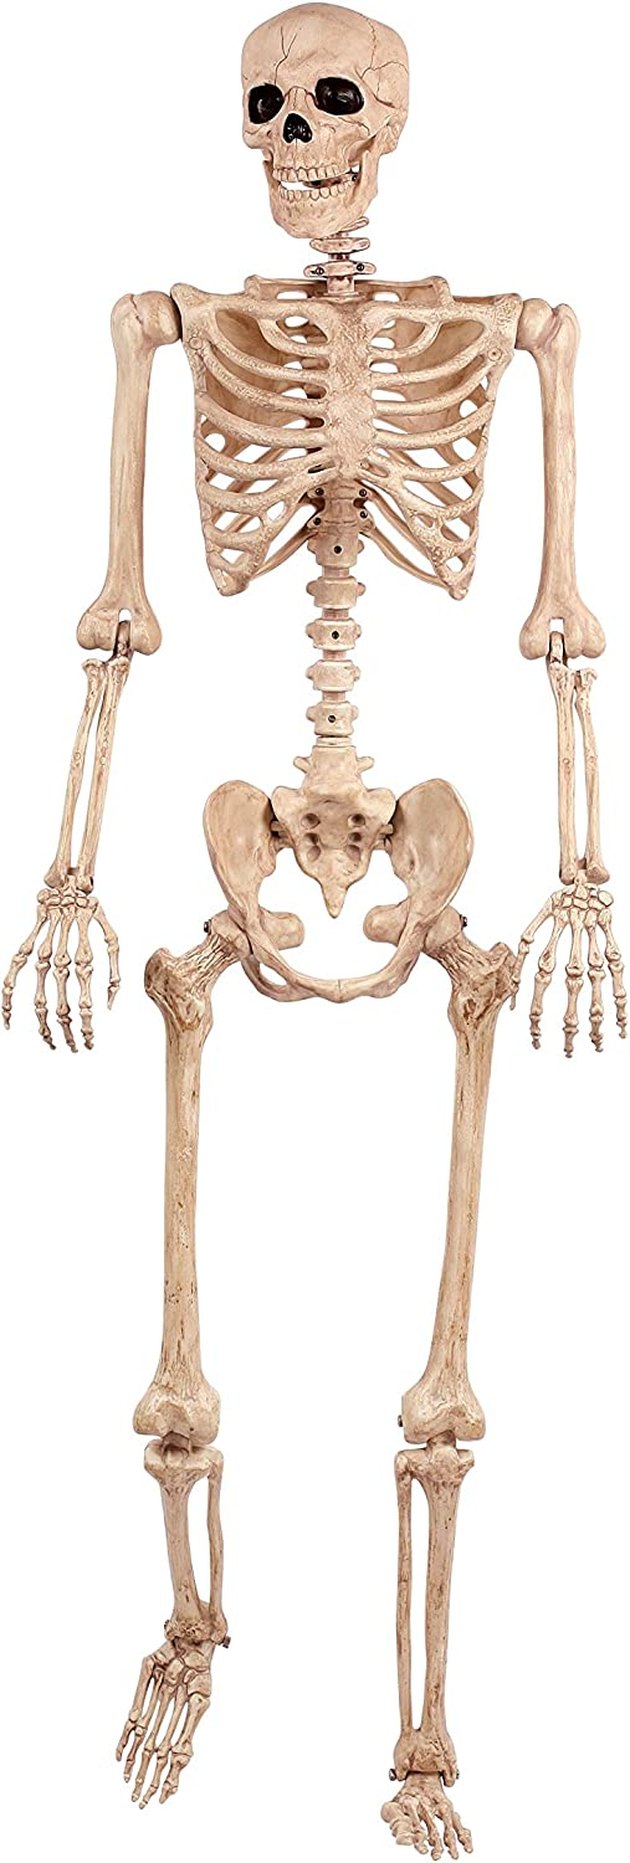 At 5 feet tall, there are so many fun ways to set up this fake skeleton, whether you want to decorate your yard or inside your house.